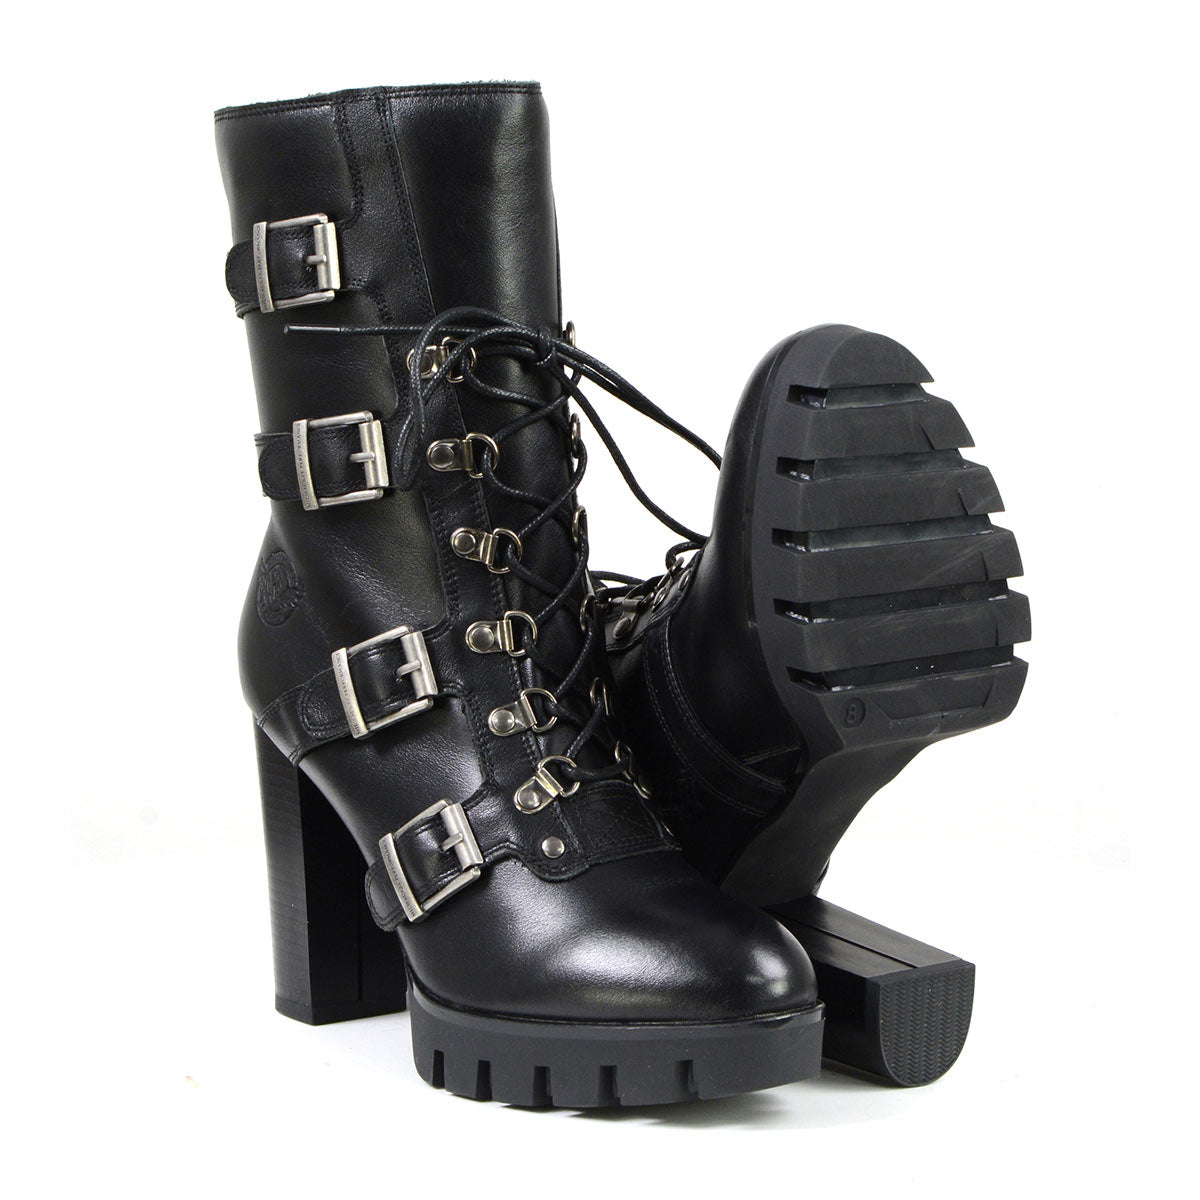 Milwaukee Leather MBL9459 Women's Black Leather Buckles Platform Boots